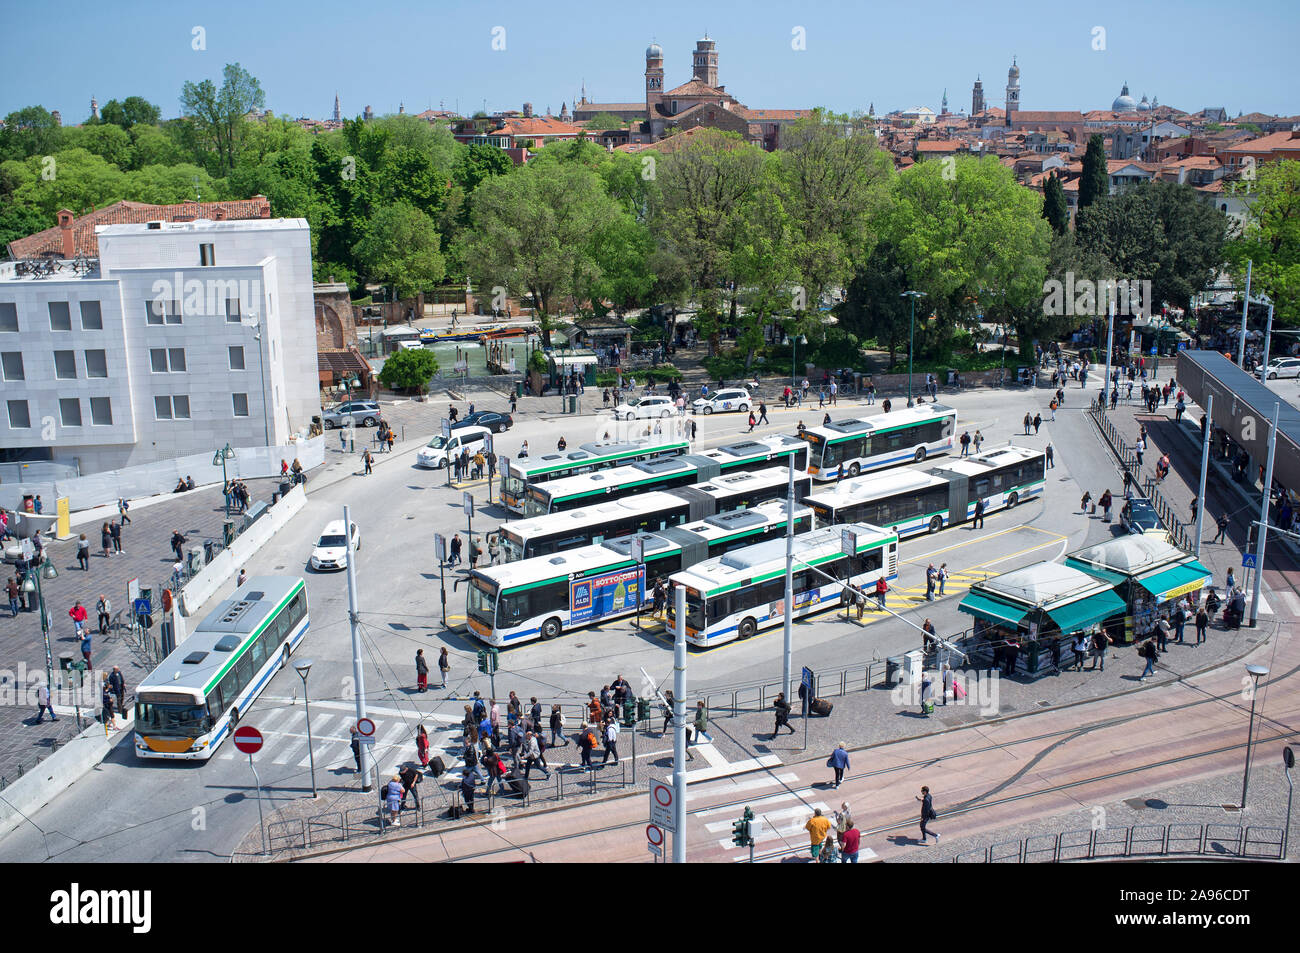 10 - May - 2019, Piazzale Roma, Venice, Italy - Is a square in Venice at the entrance of the city. The square acts as the main bus station for Venice. Stock Photo